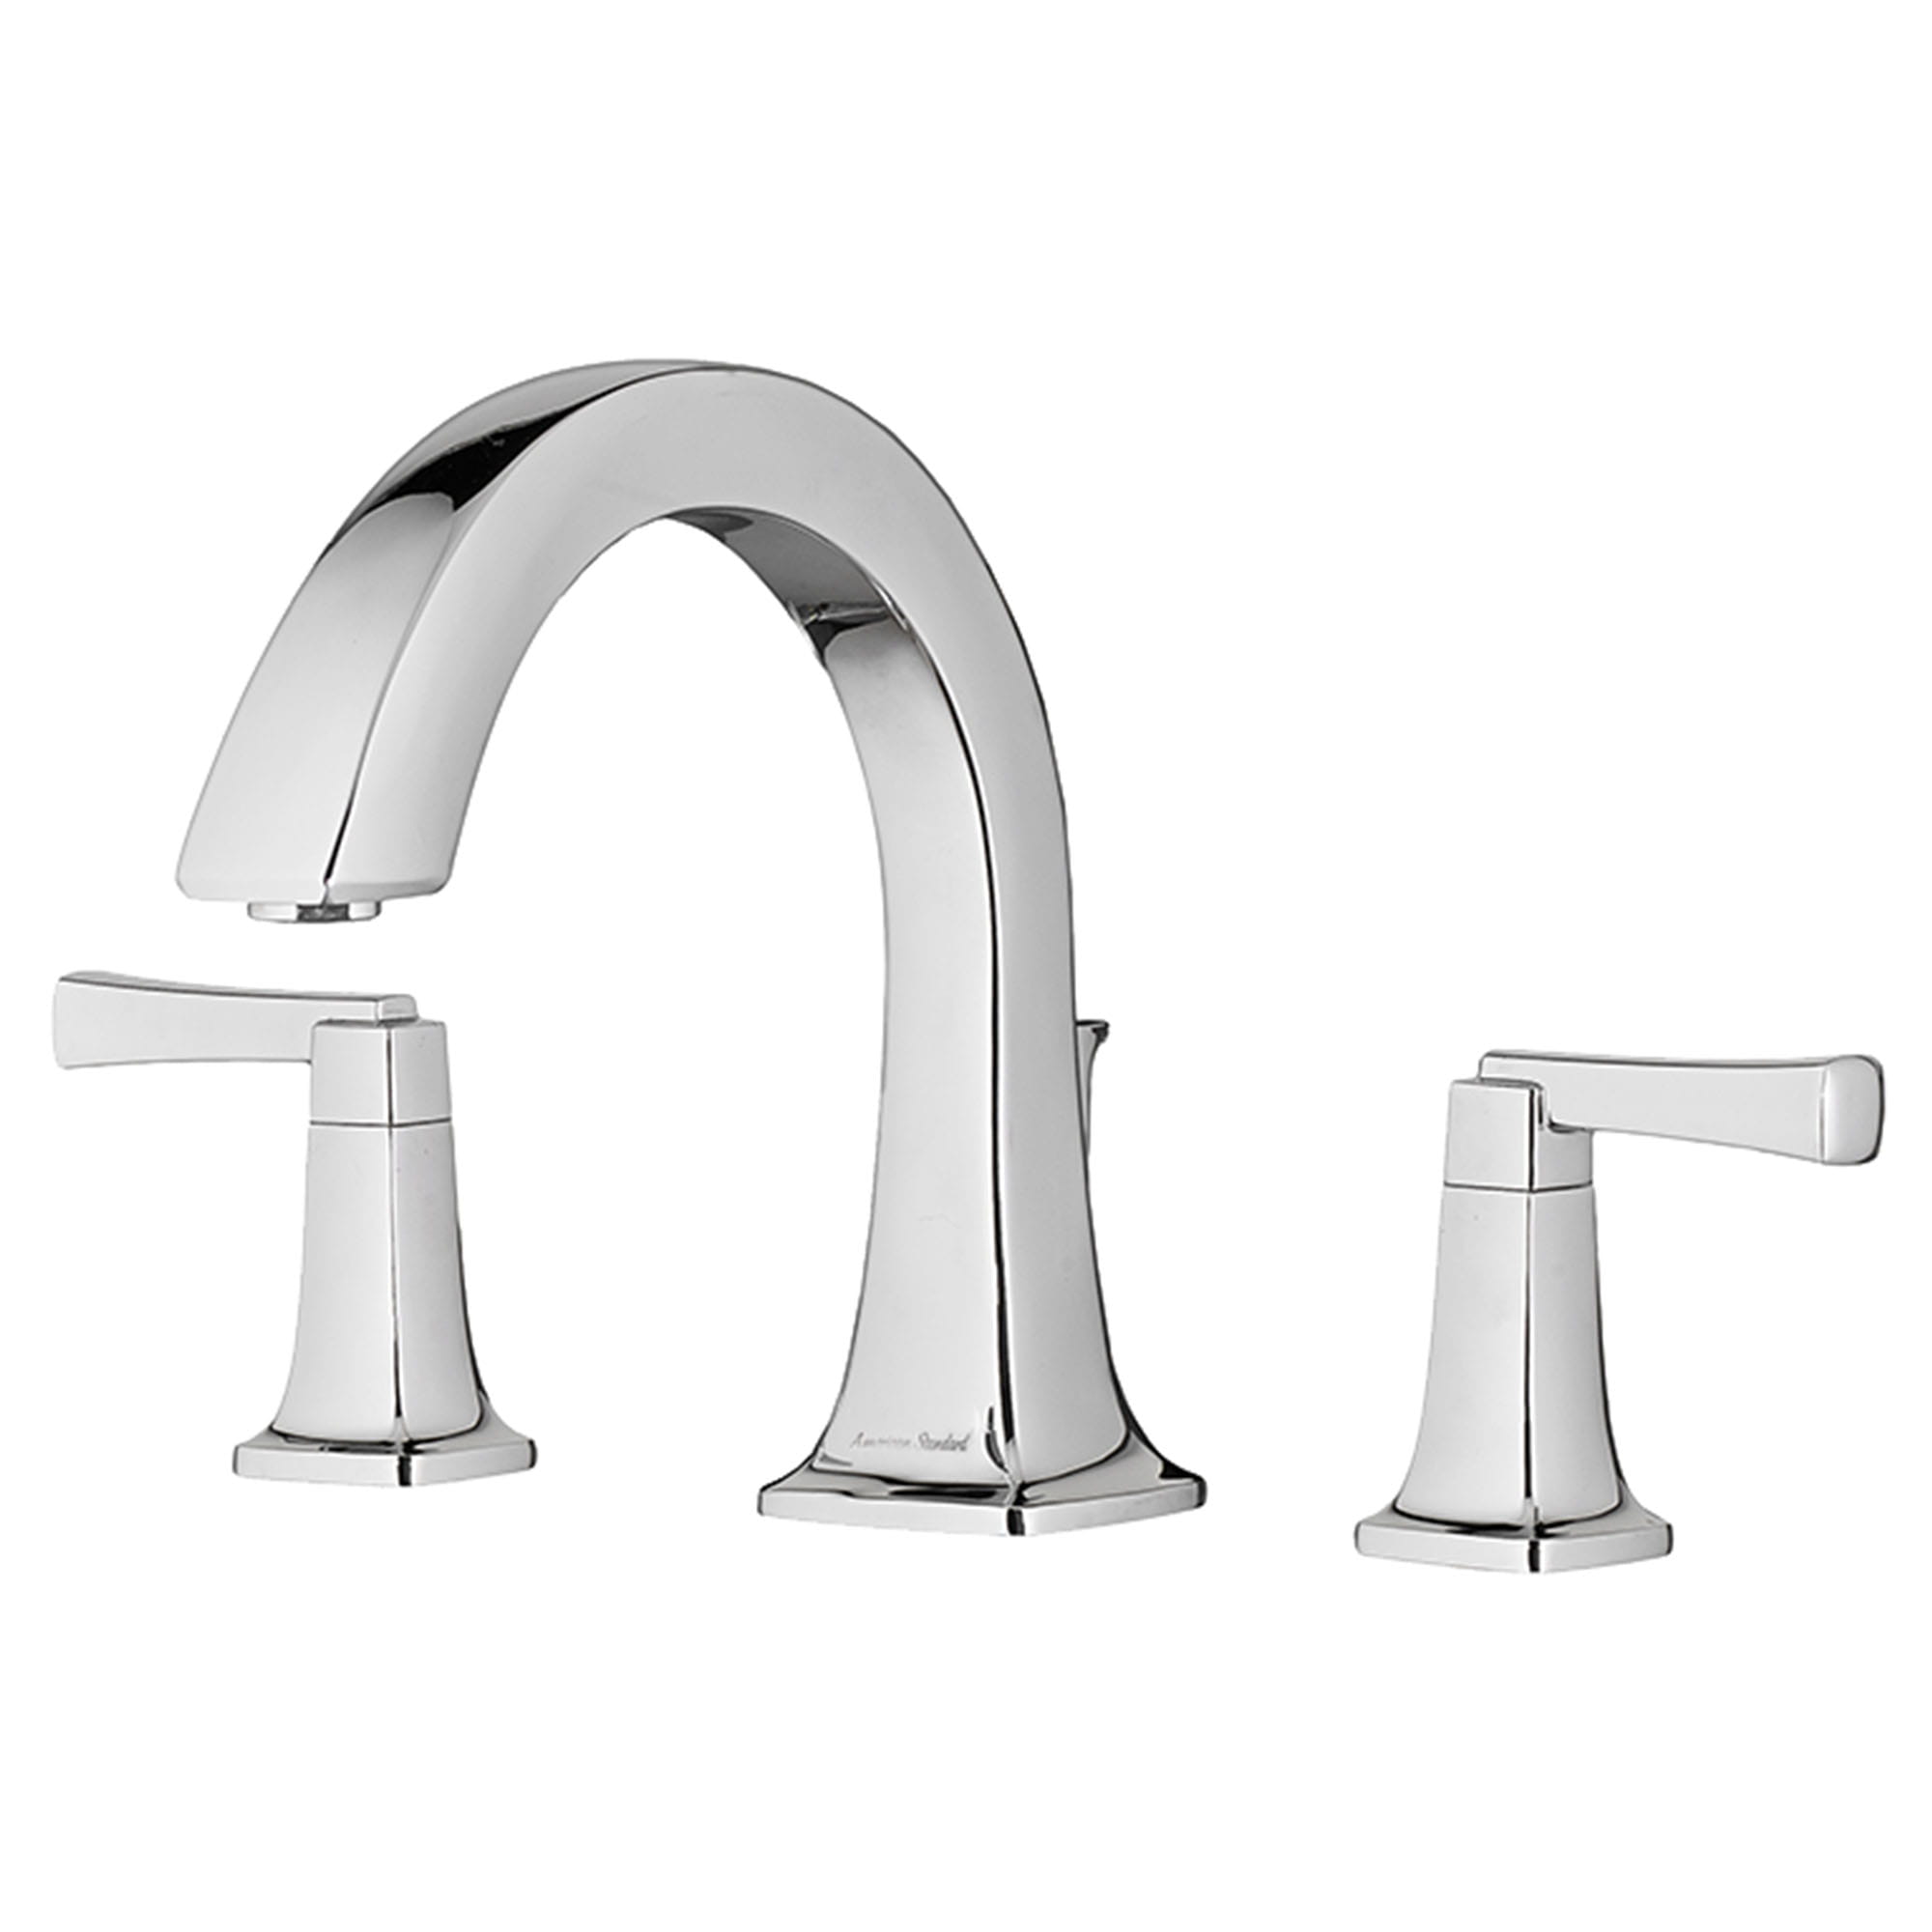 Townsend Bathtub Faucet With Lever Handles for Flash Rough In Valve CHROME